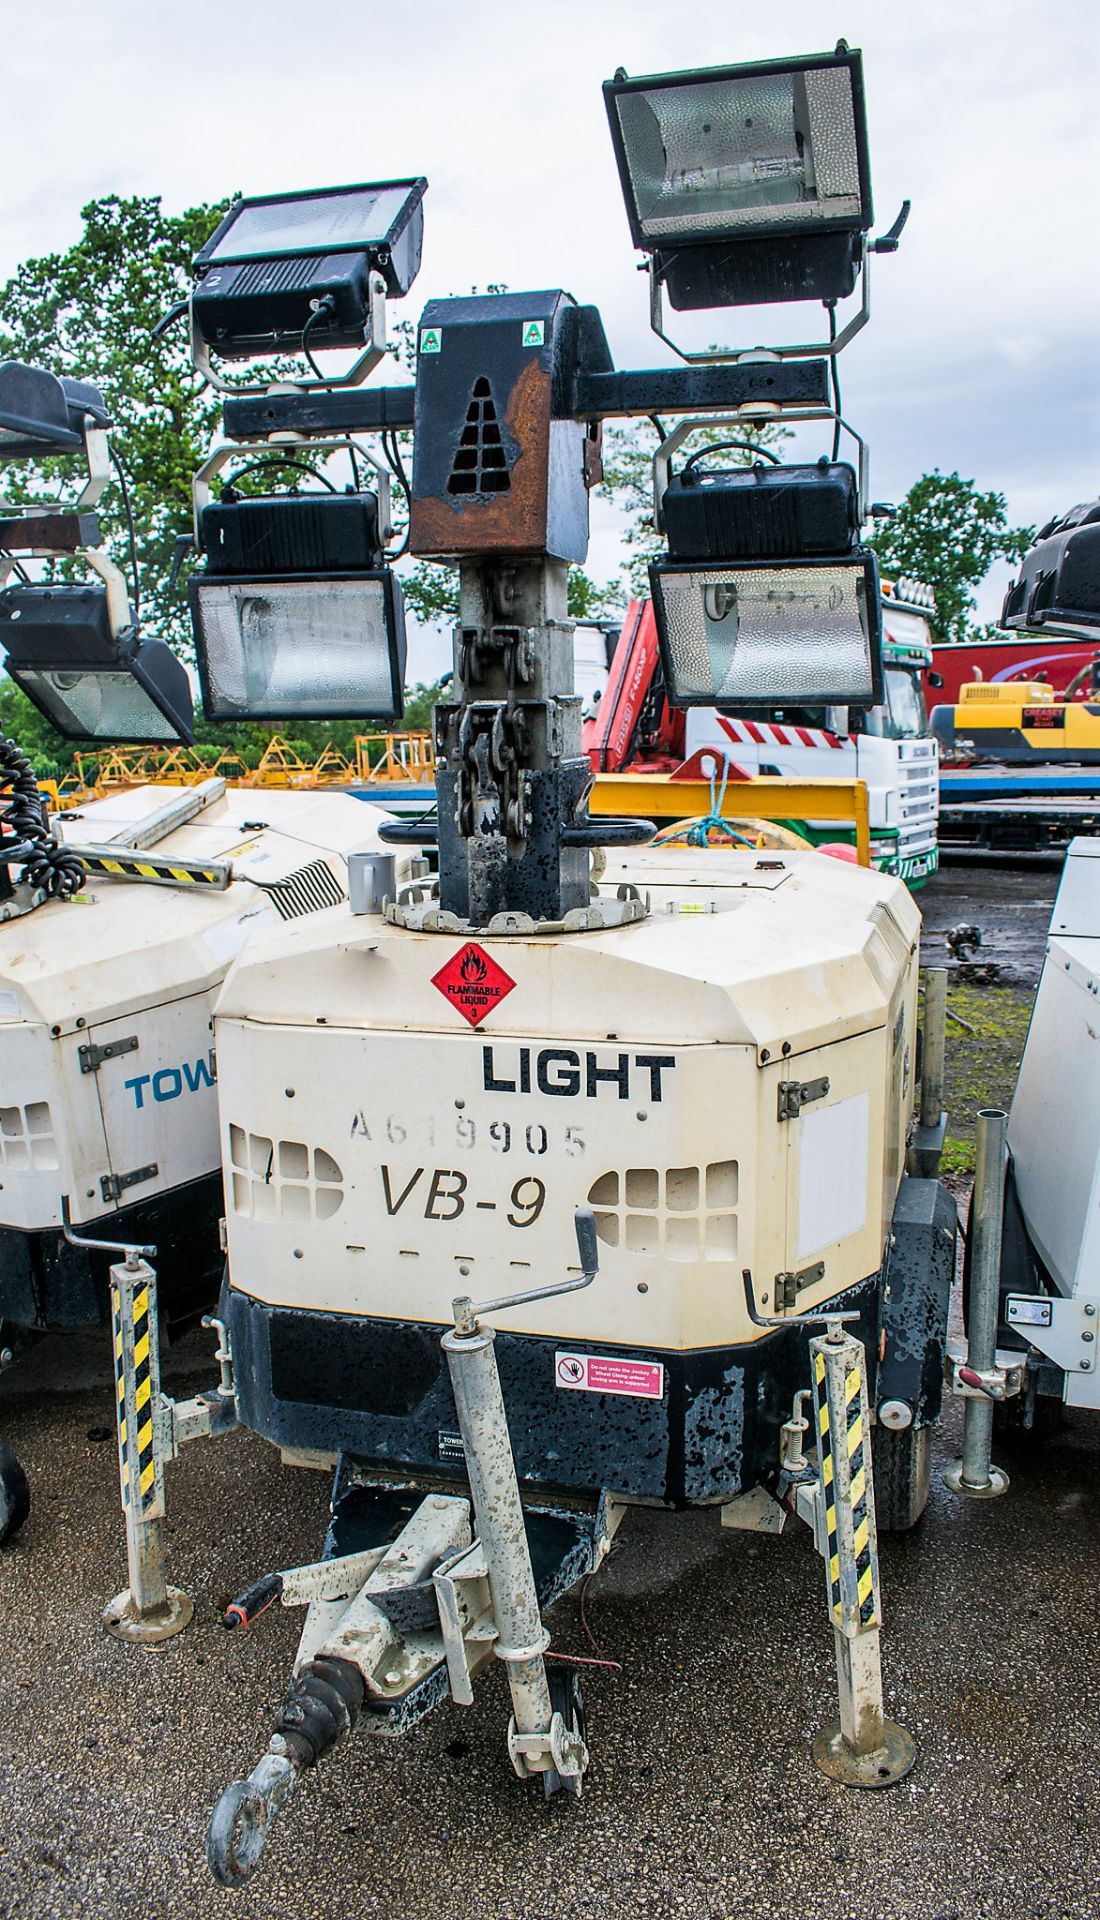 TOWERLIGHT VB-9 diesel driven mobile lighting tower Year: 2013 S/N: 1302841 Recorded hours: 4082